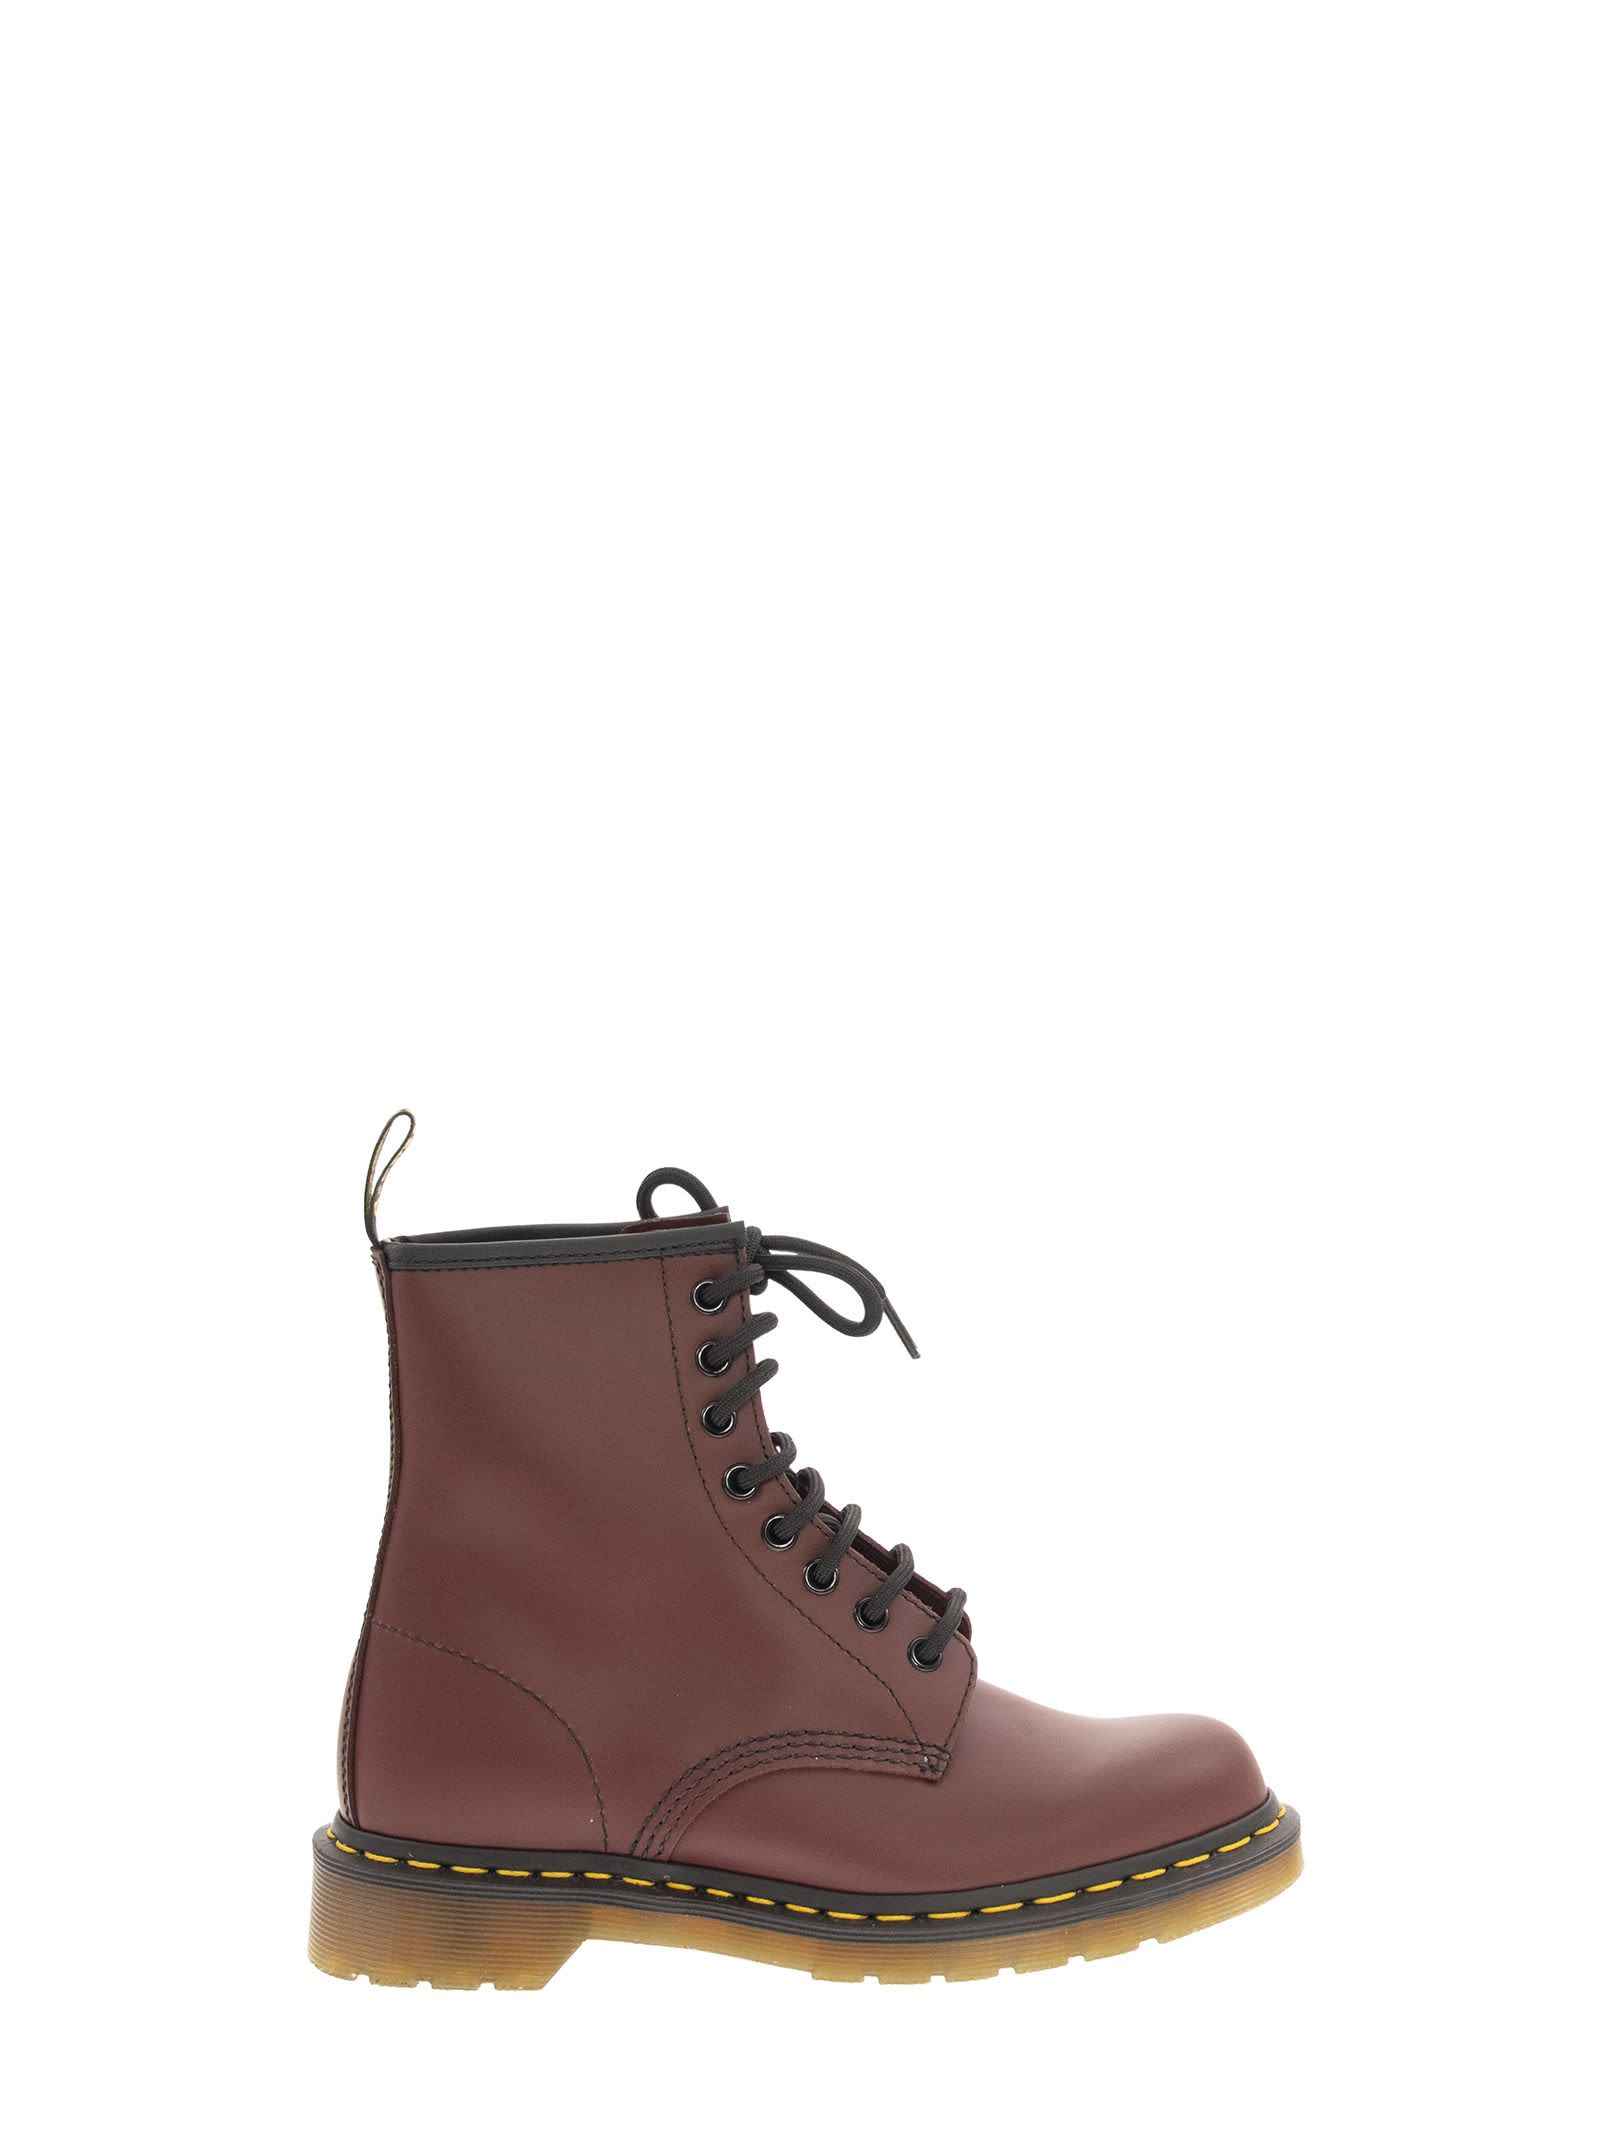 Buy Dr. Martens 1460 Smooth Leather Ankle Boots Cherry Red online, shop Dr. Martens shoes with free shipping